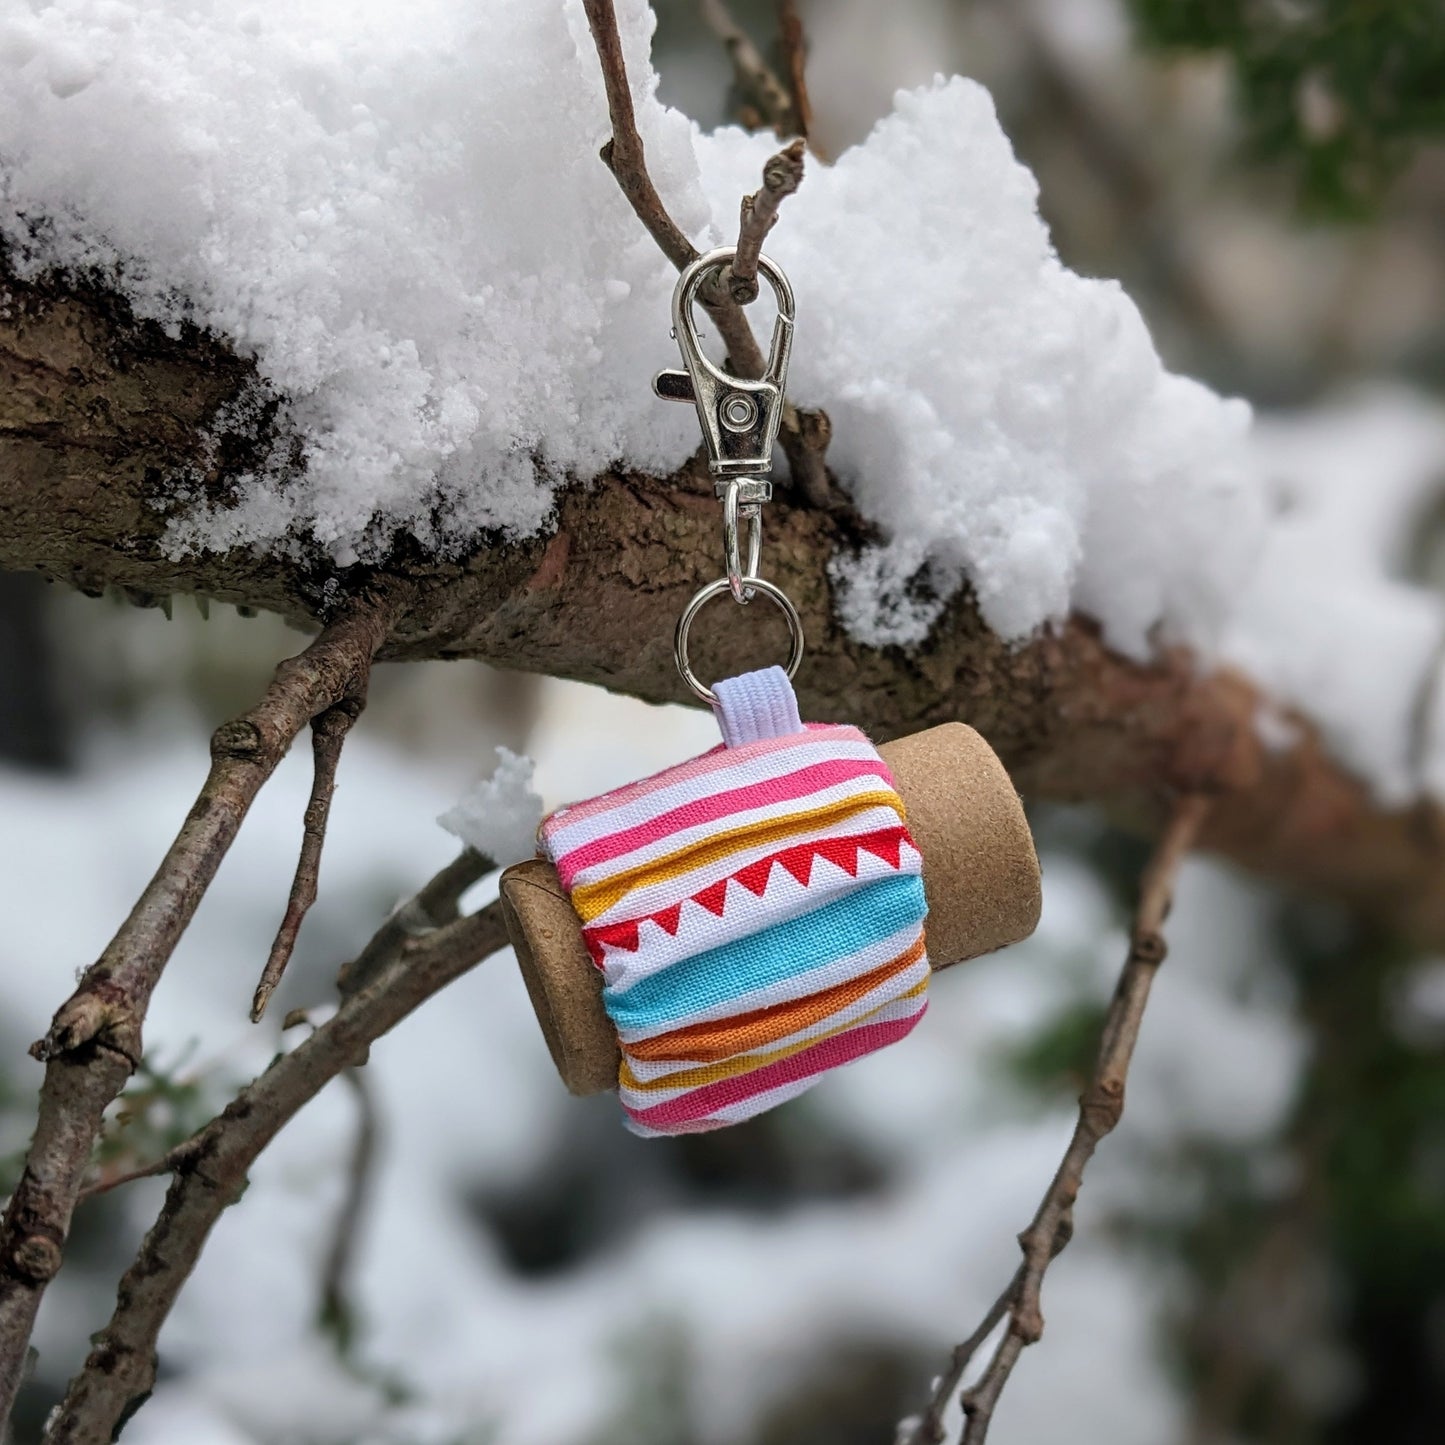 Handmade Lip Balm Holder - Fabric Chapstick Holder with Keychain Clip. Pair with our Zero Waste Plastic Free Lip Chap!